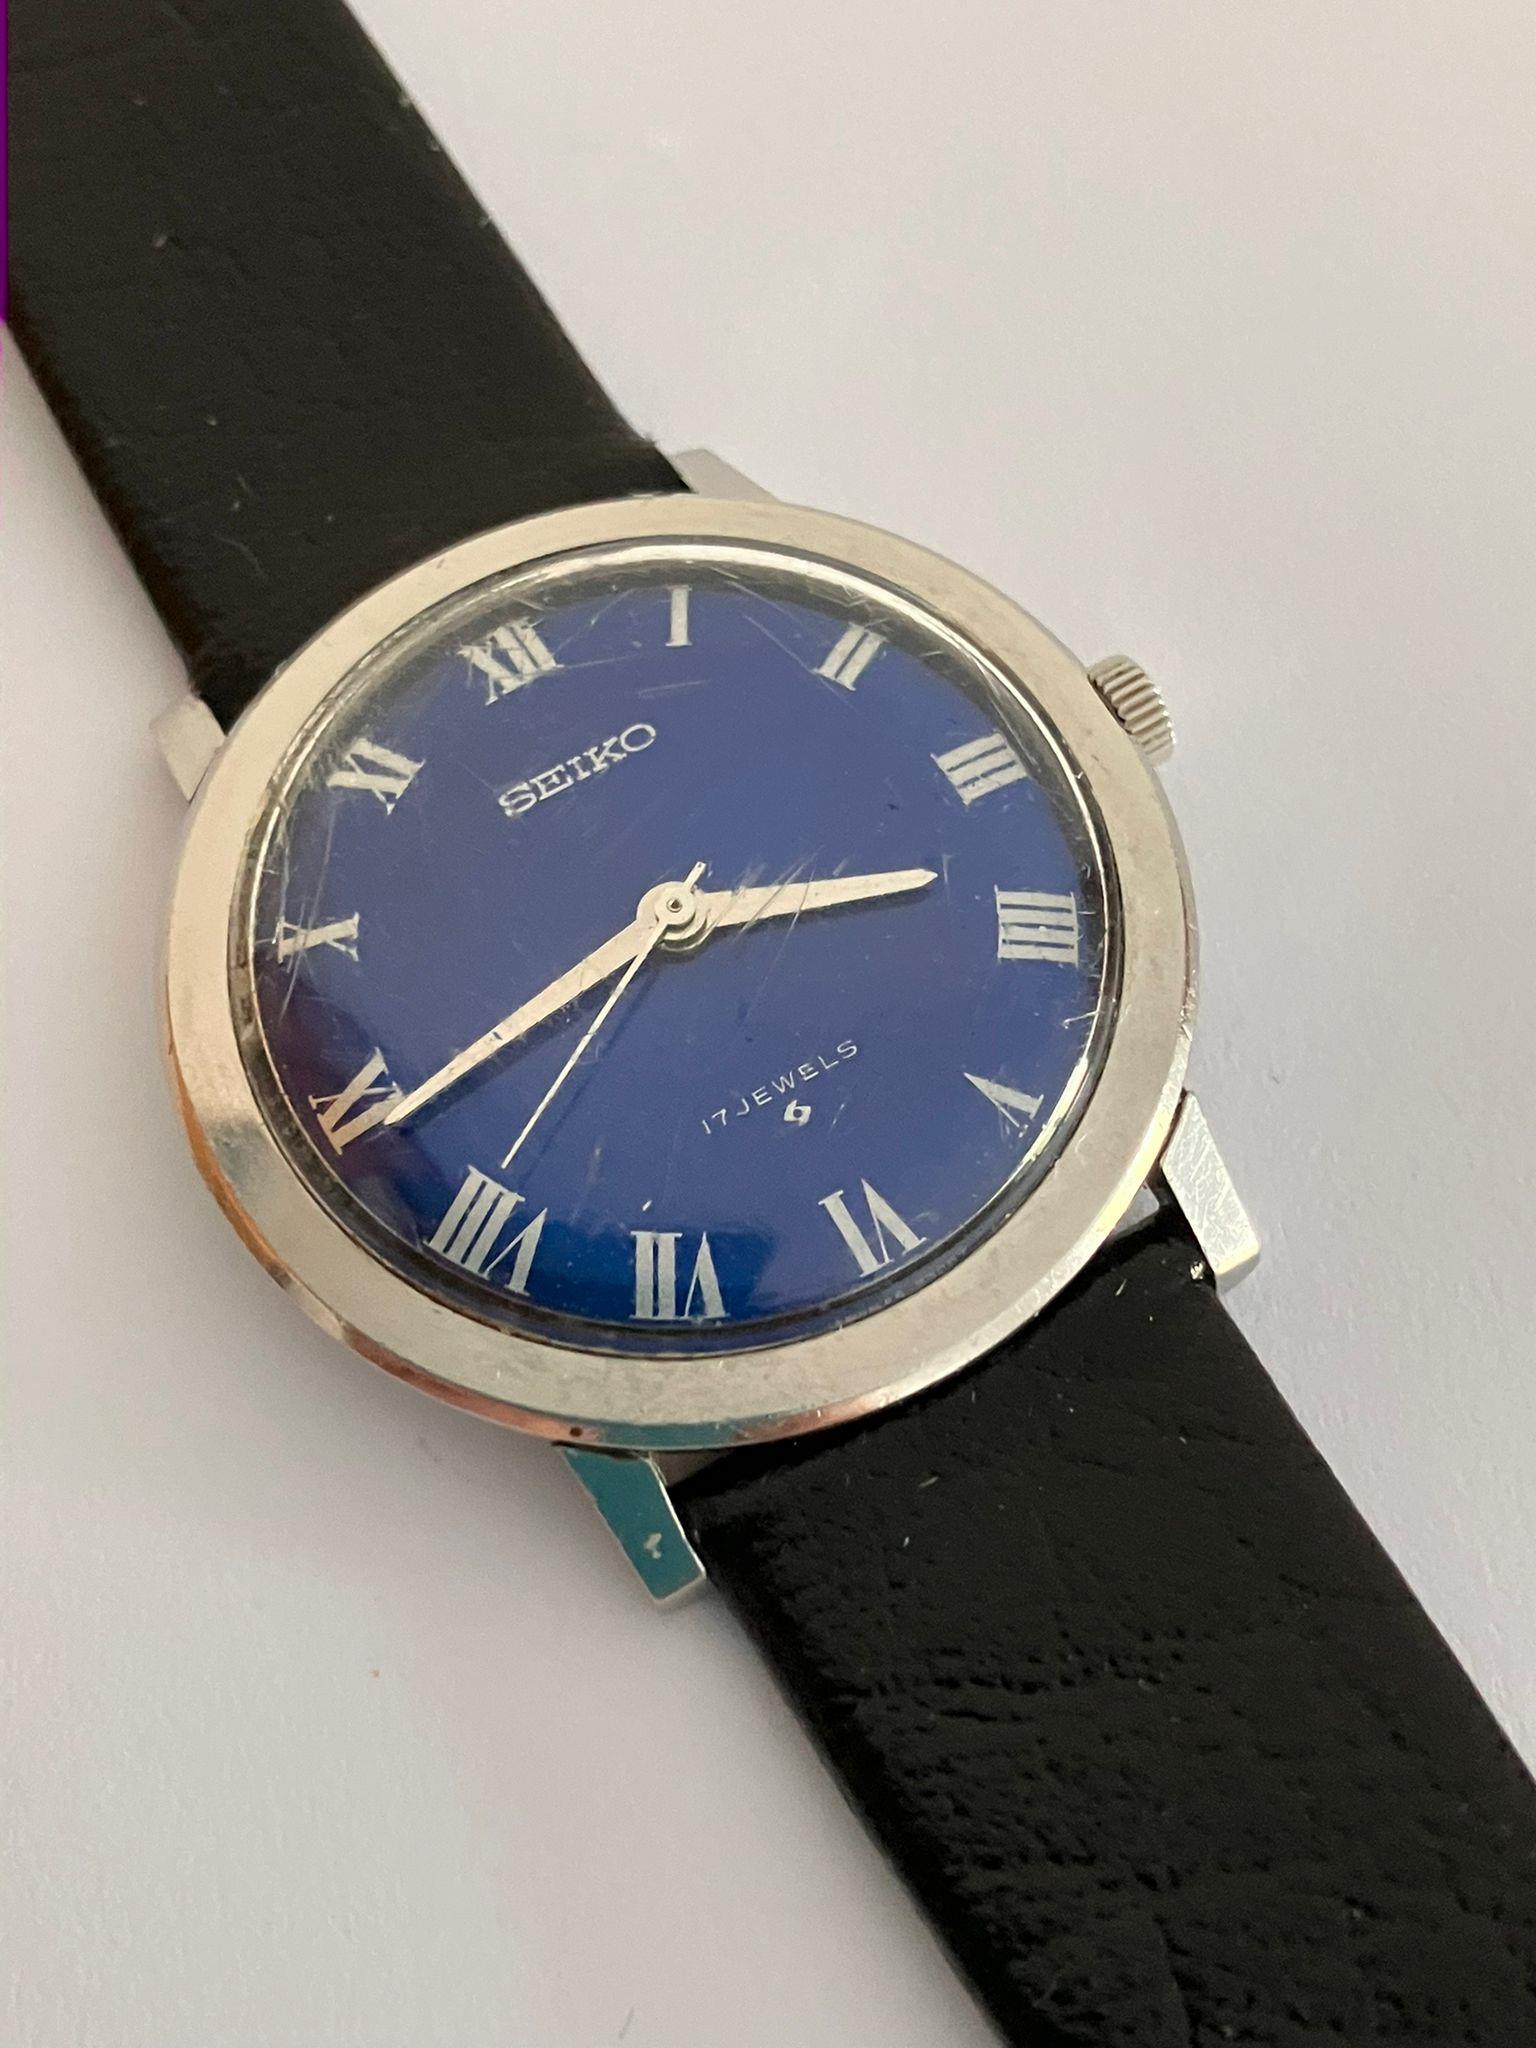 Gentlemans vintage SEIKO 66- 7090 wristwatch. Blue Face Model with Roman numerals. Manual winding in